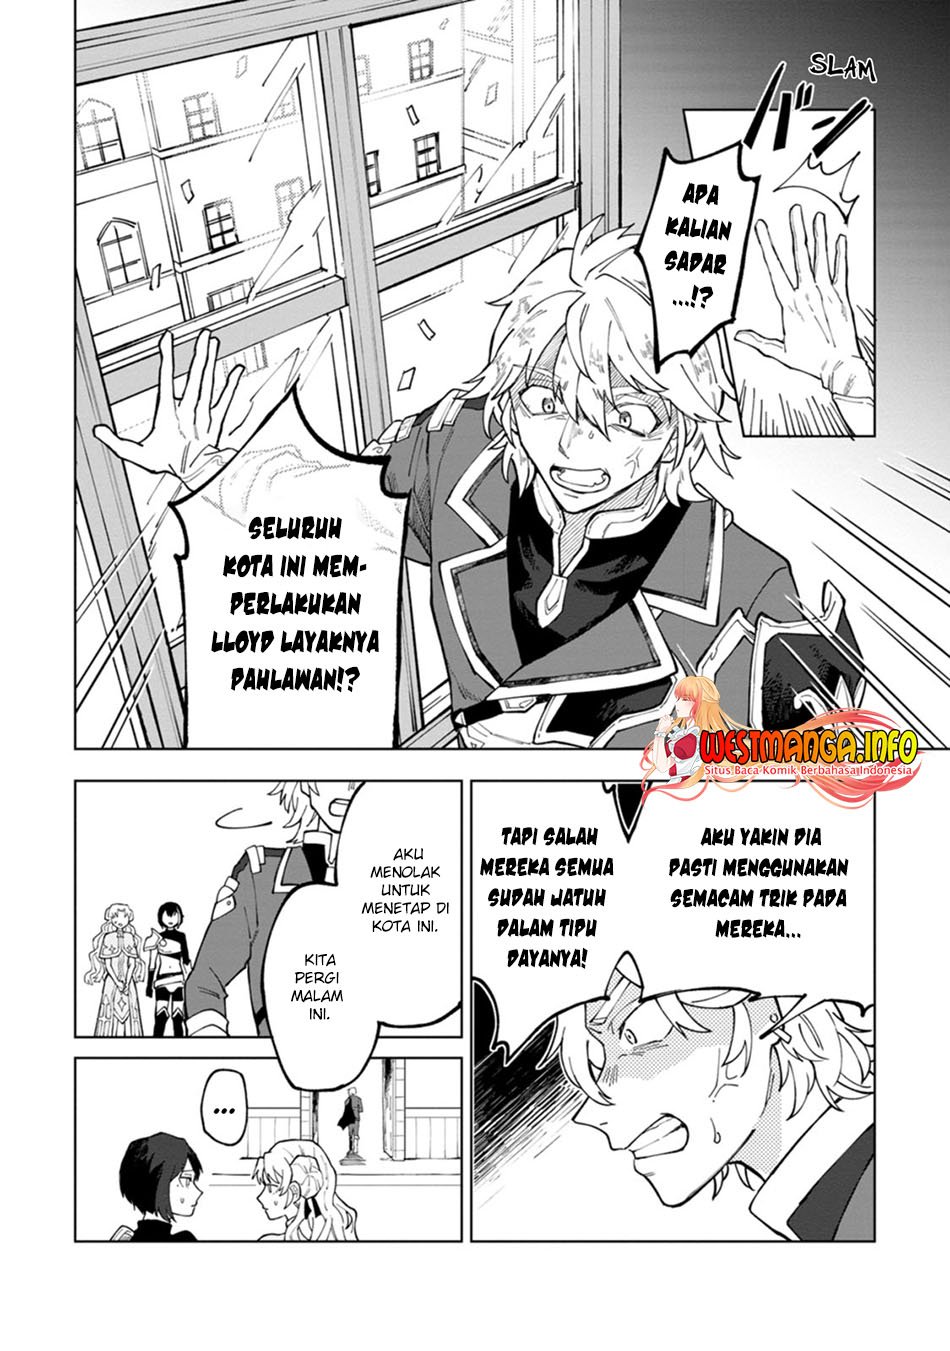 KomiknThe White Mage Who Was Banished From the Hero’s Party Is Picked up by an S Rank Adventurer ~ This White Mage Is Too Out of the Ordinary! Chapter 9